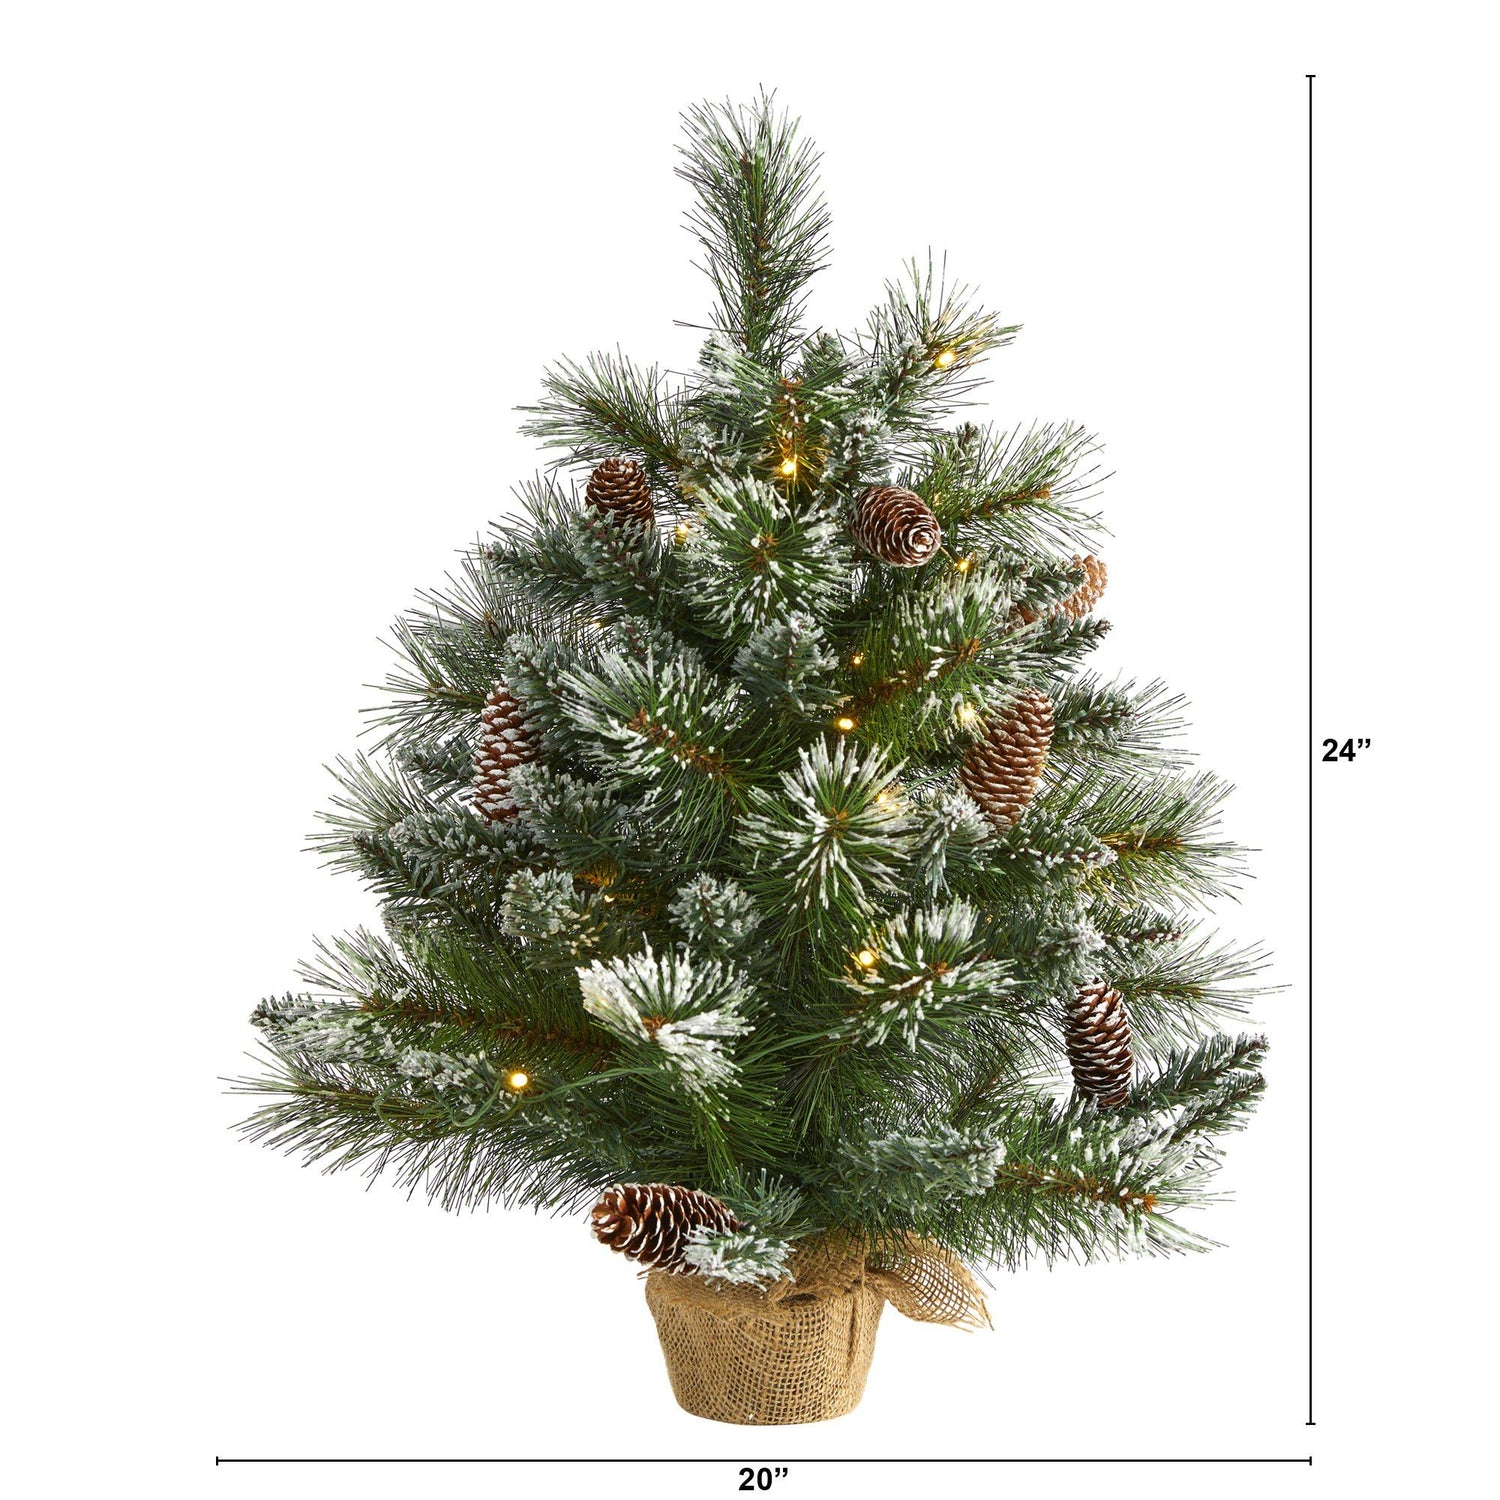 2’ Frosted Pine Artificial Christmas Tree with 35 Clear LED Lights, Pinecones and Burlap Base